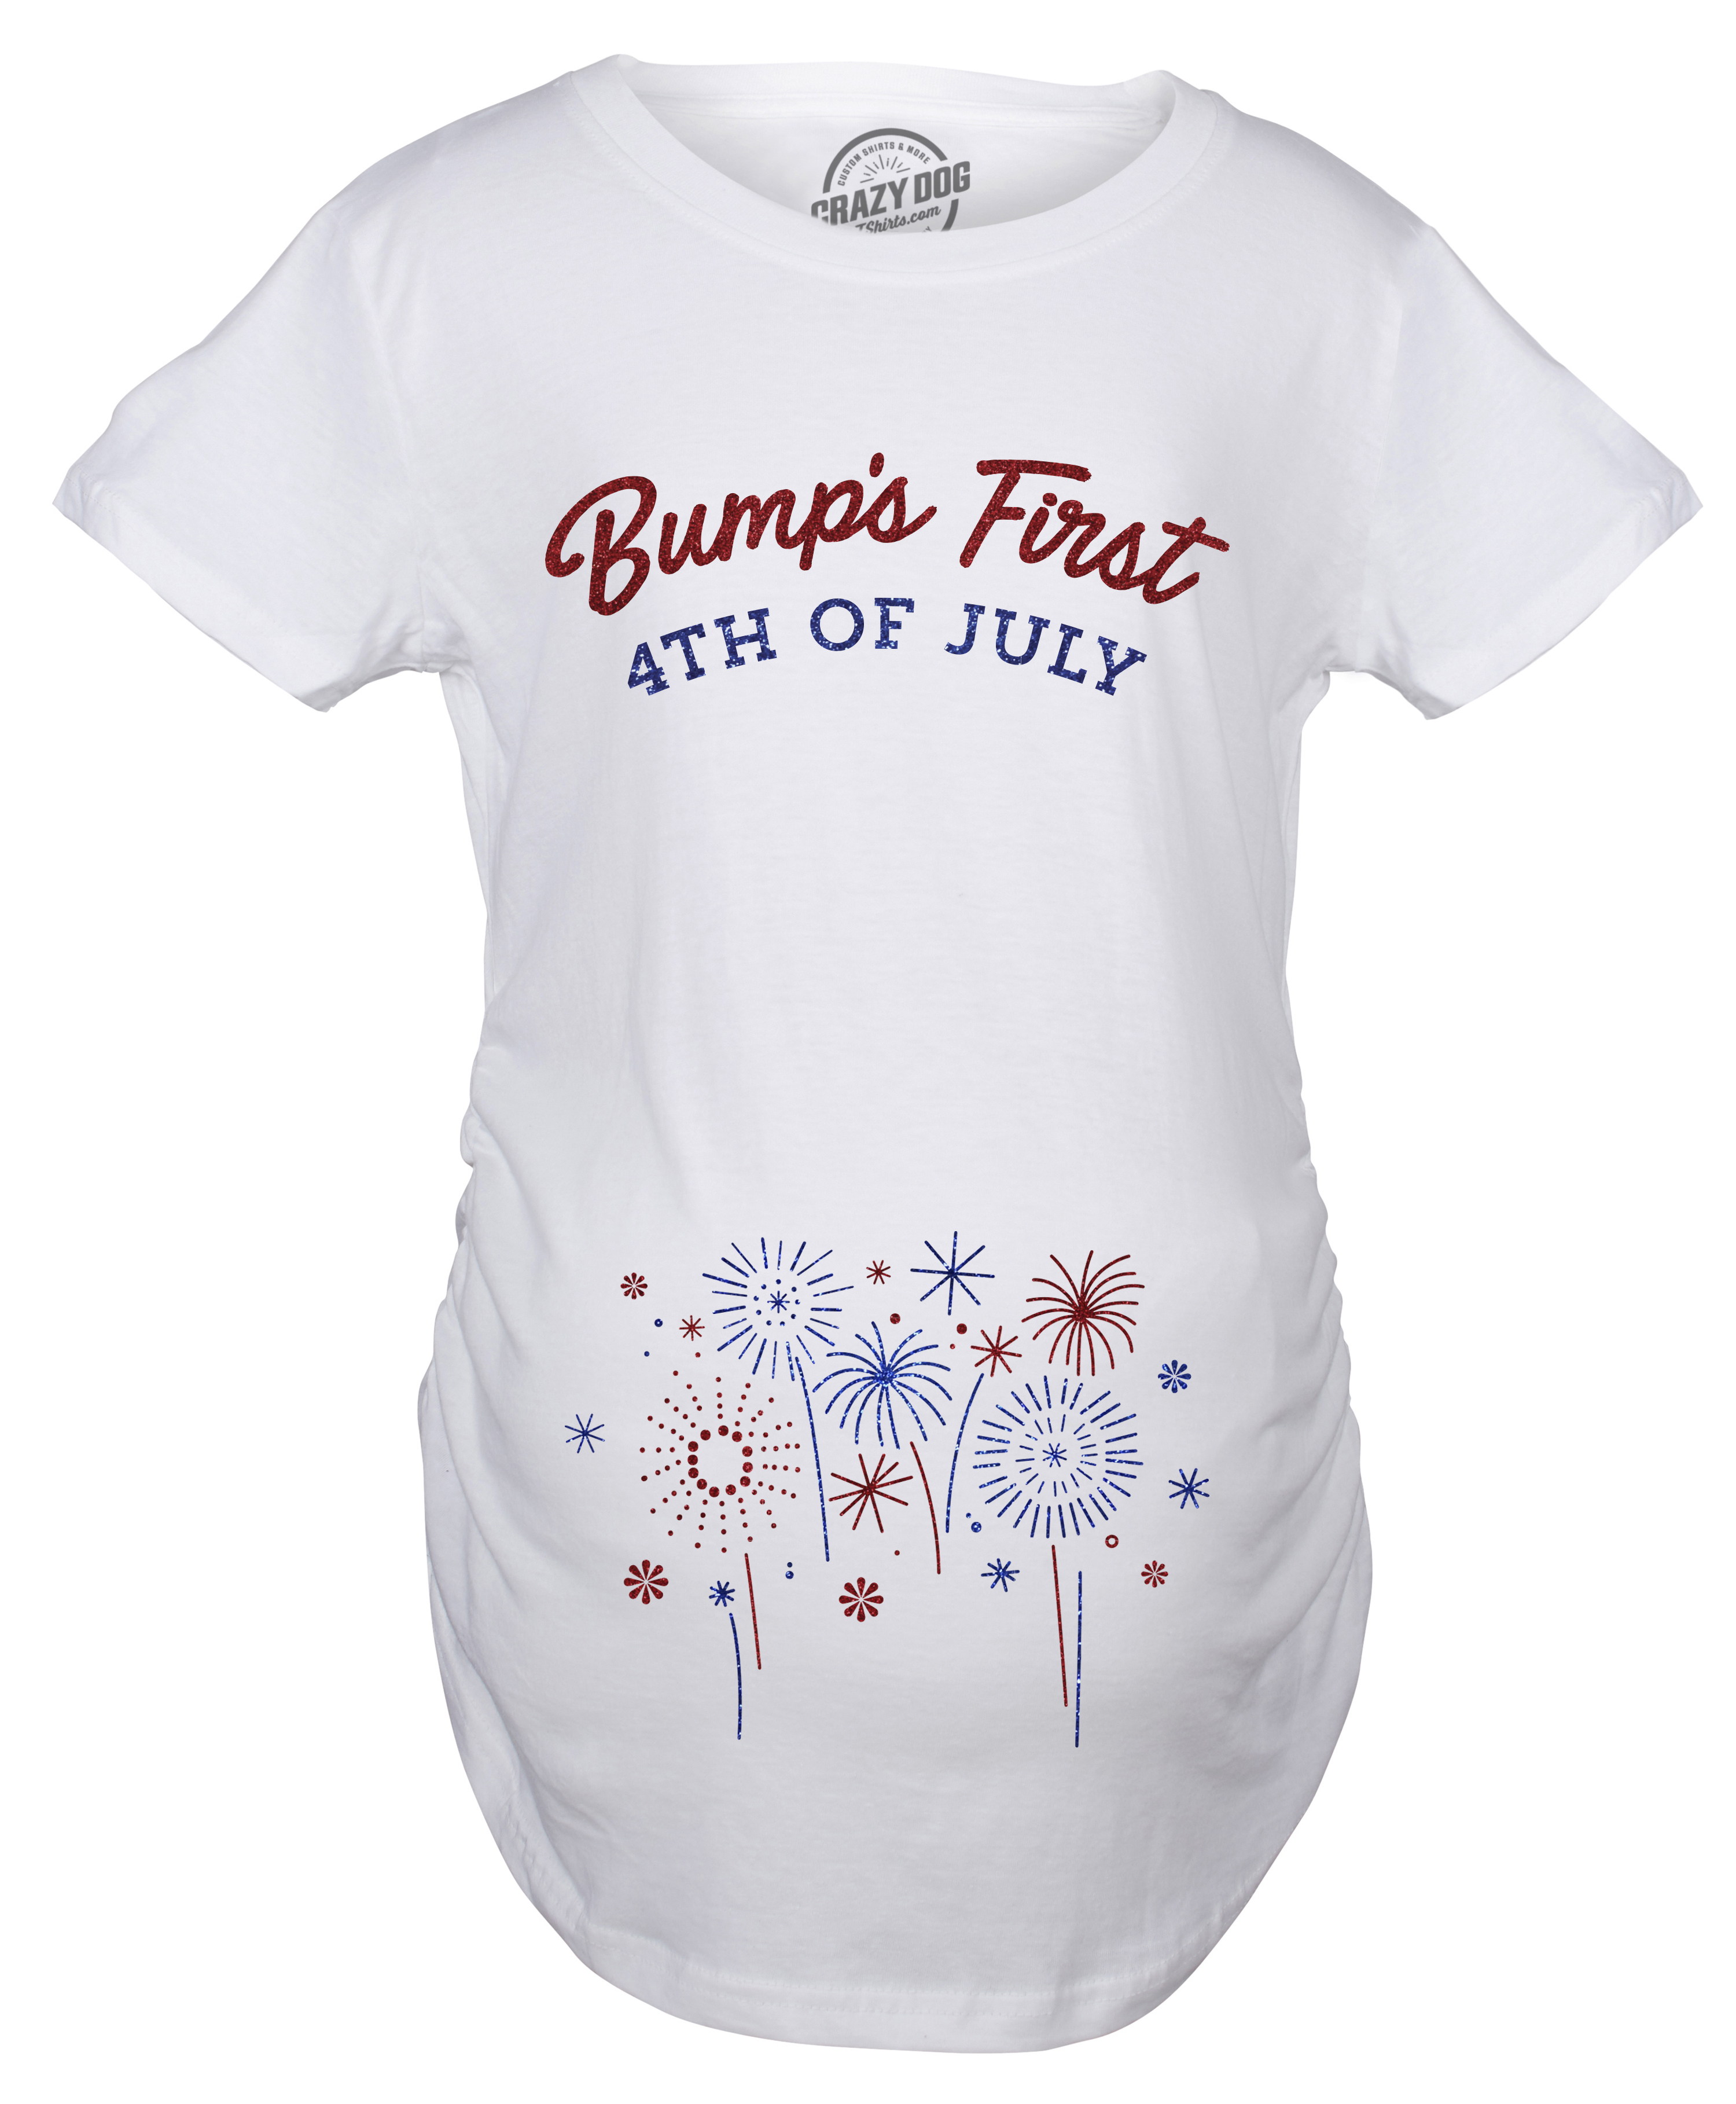 Crazy Dog Tshirts Maternity Bumps First 4th Of July Pregnancy Tshirt Funny Patriotic Tee For Baby Bump